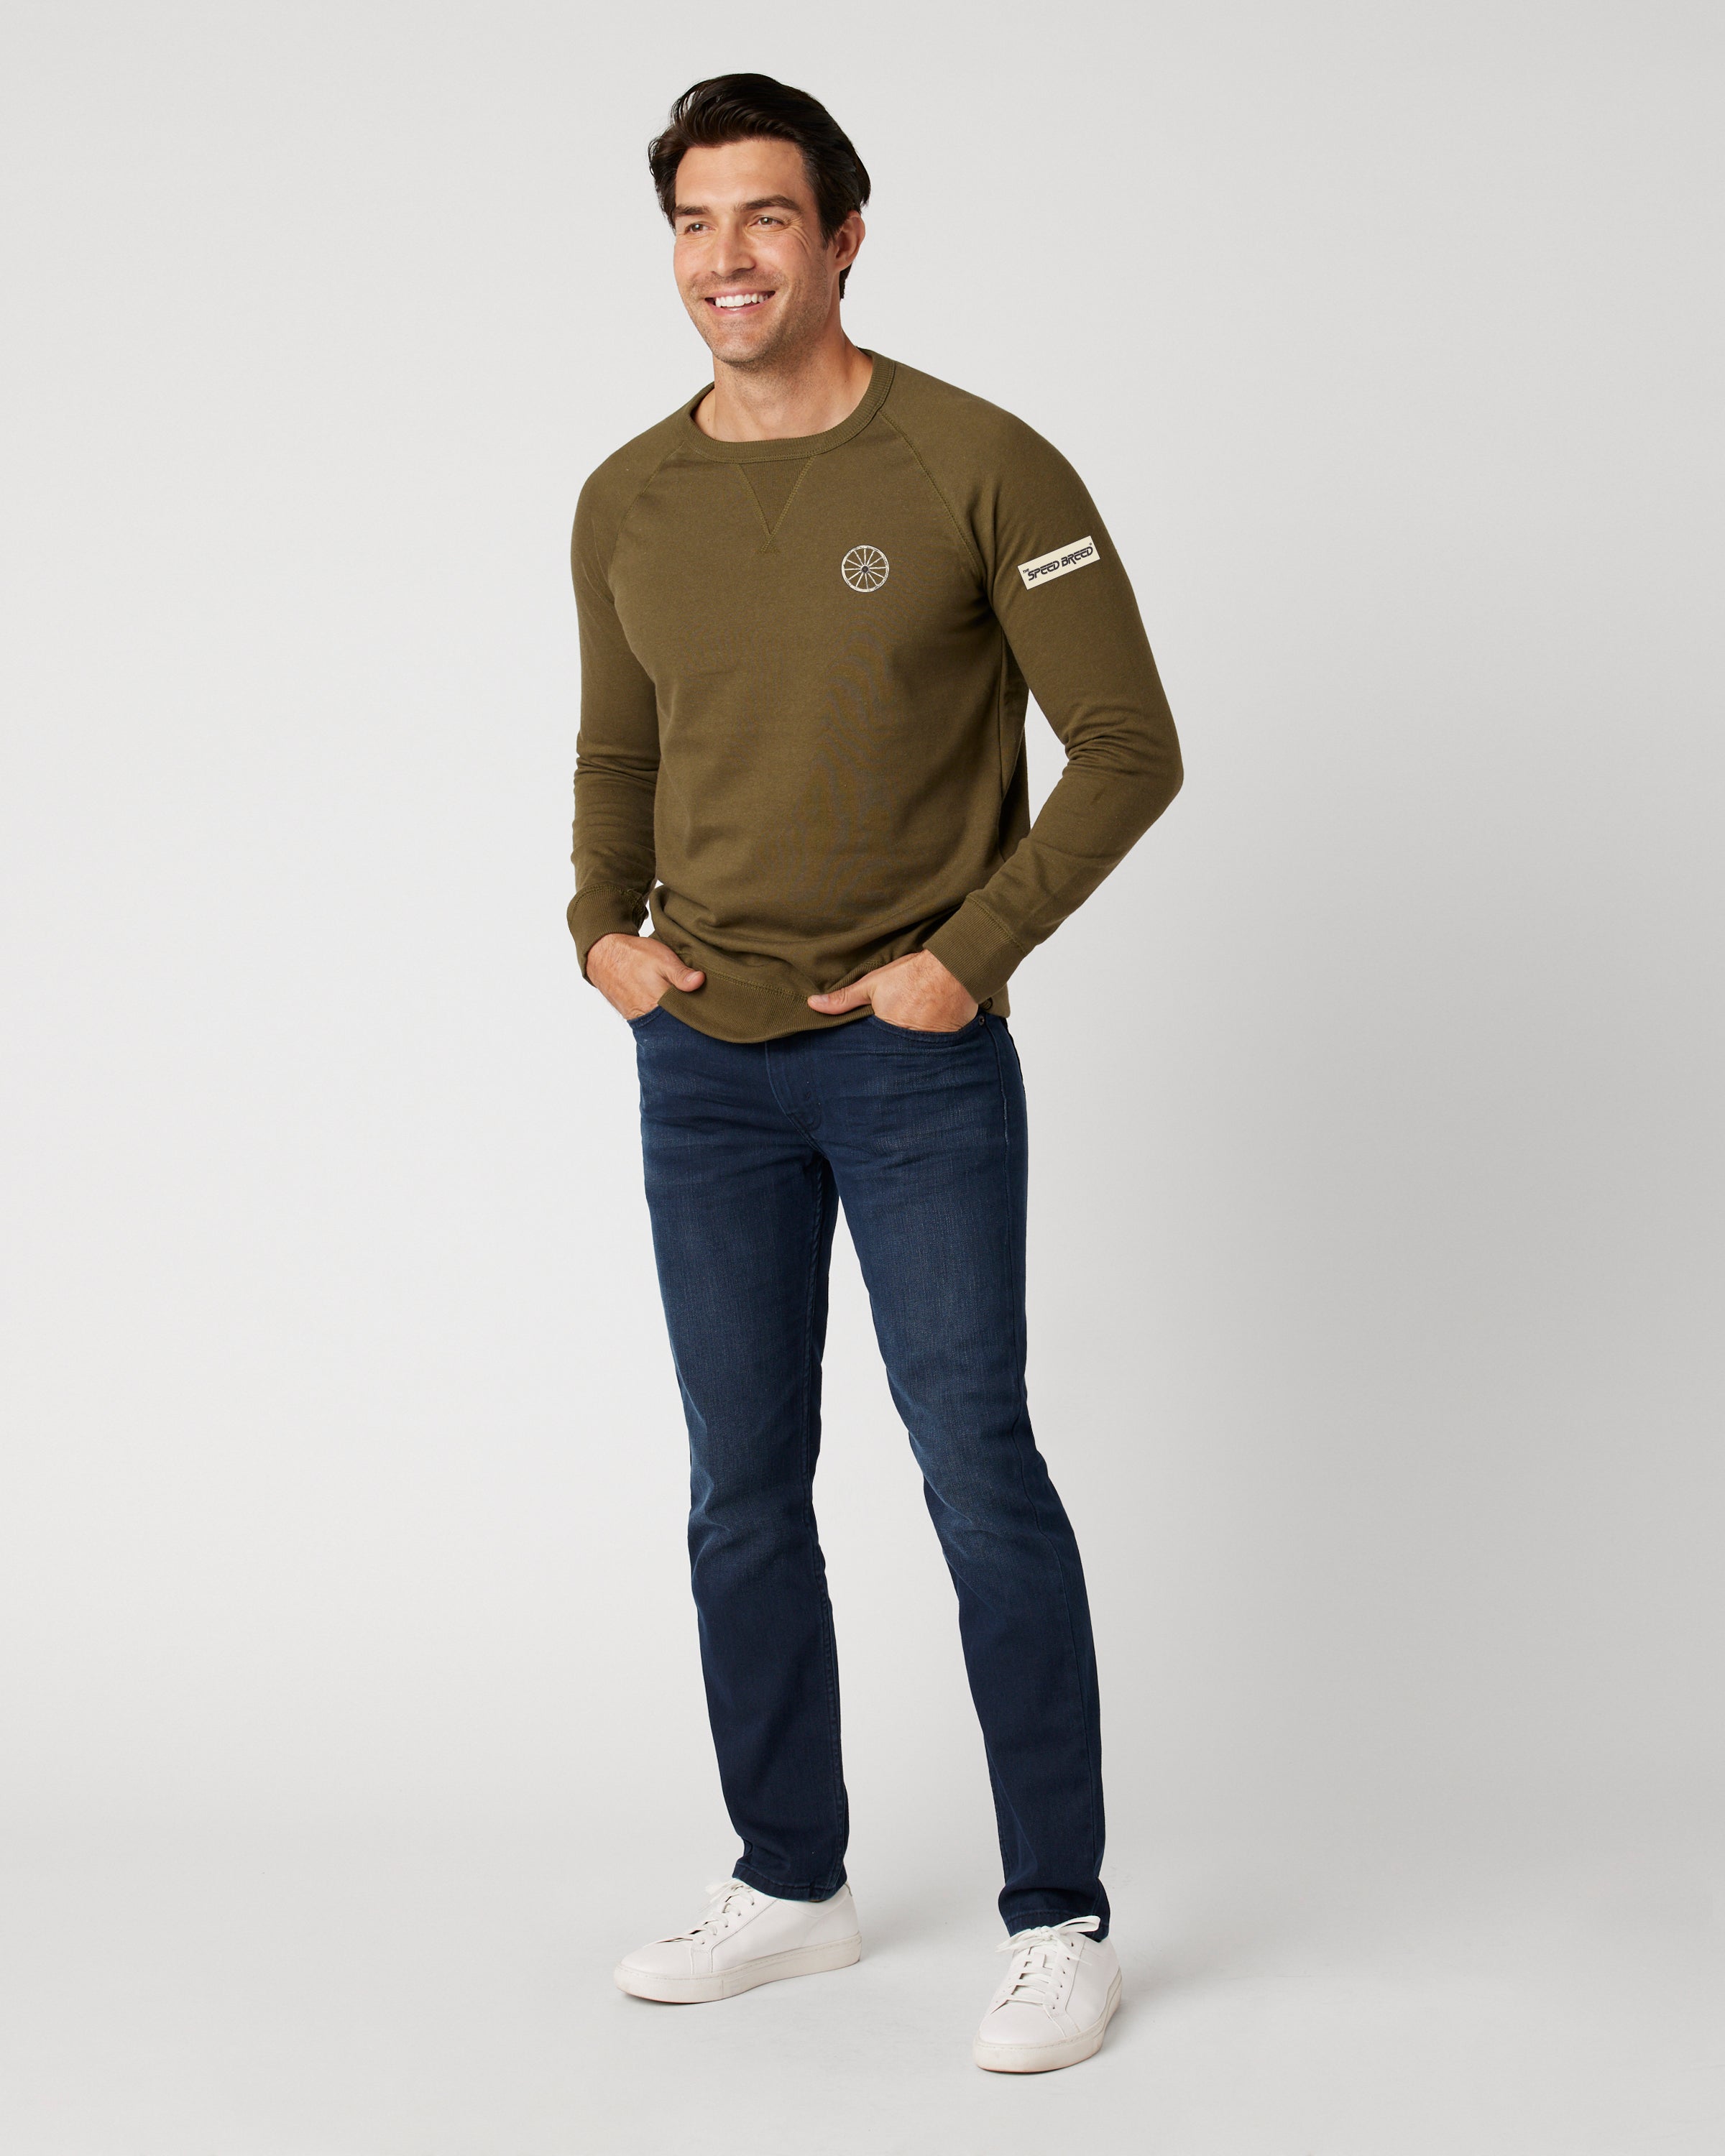 CHARIOTS EMBROIDERED UNISEX FRENCH TERRY CREW NECK SWEATER (Military Green)